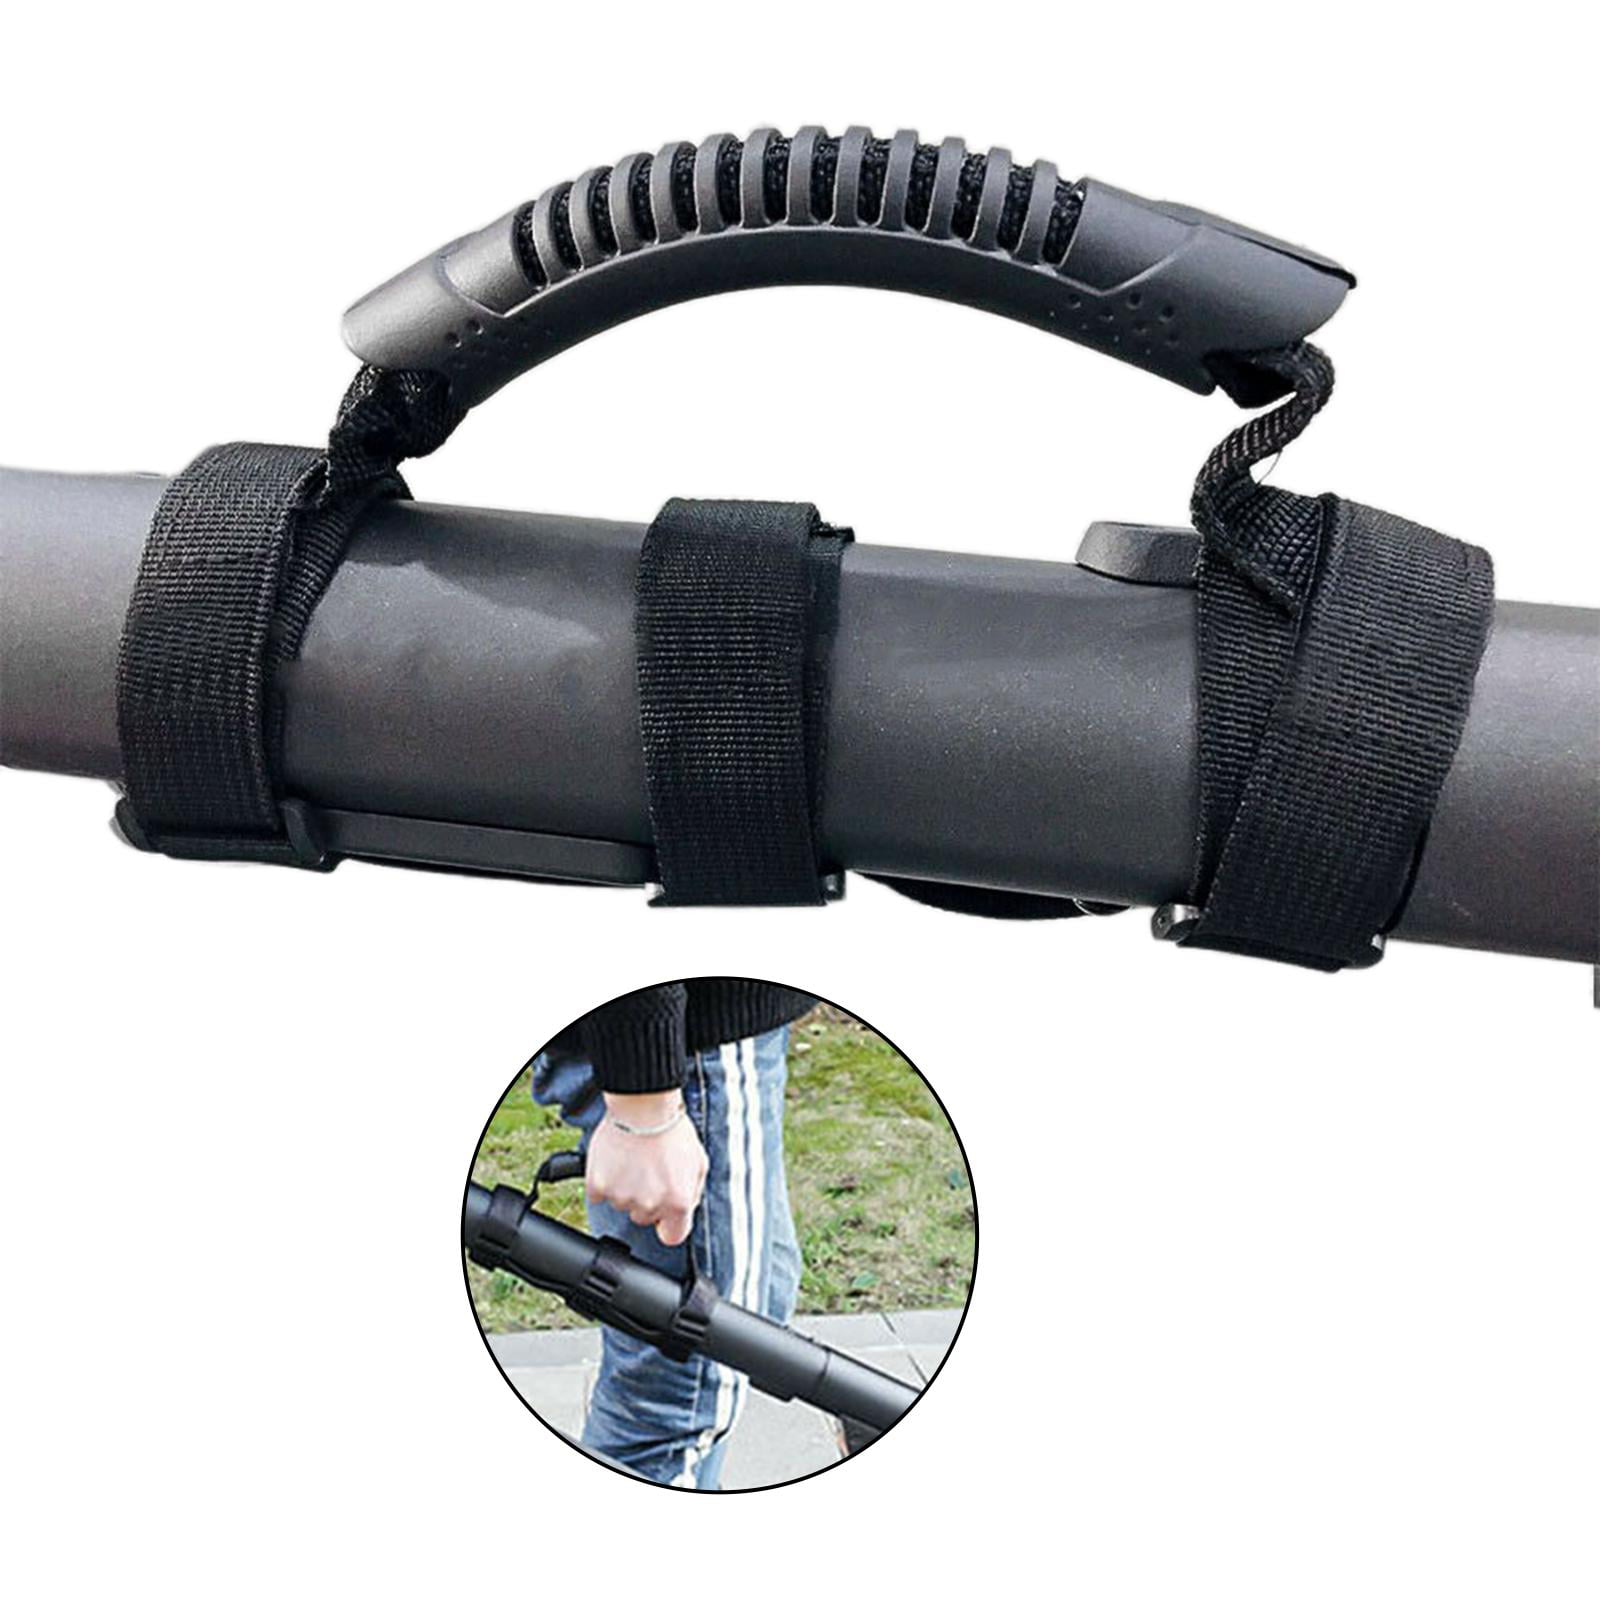 AIWEIYER Scooter Skateboard Hand Strap Belt,Electric Scooter Accessories Labor Saving Carrying Handle Bandage Black for Electric Scooter